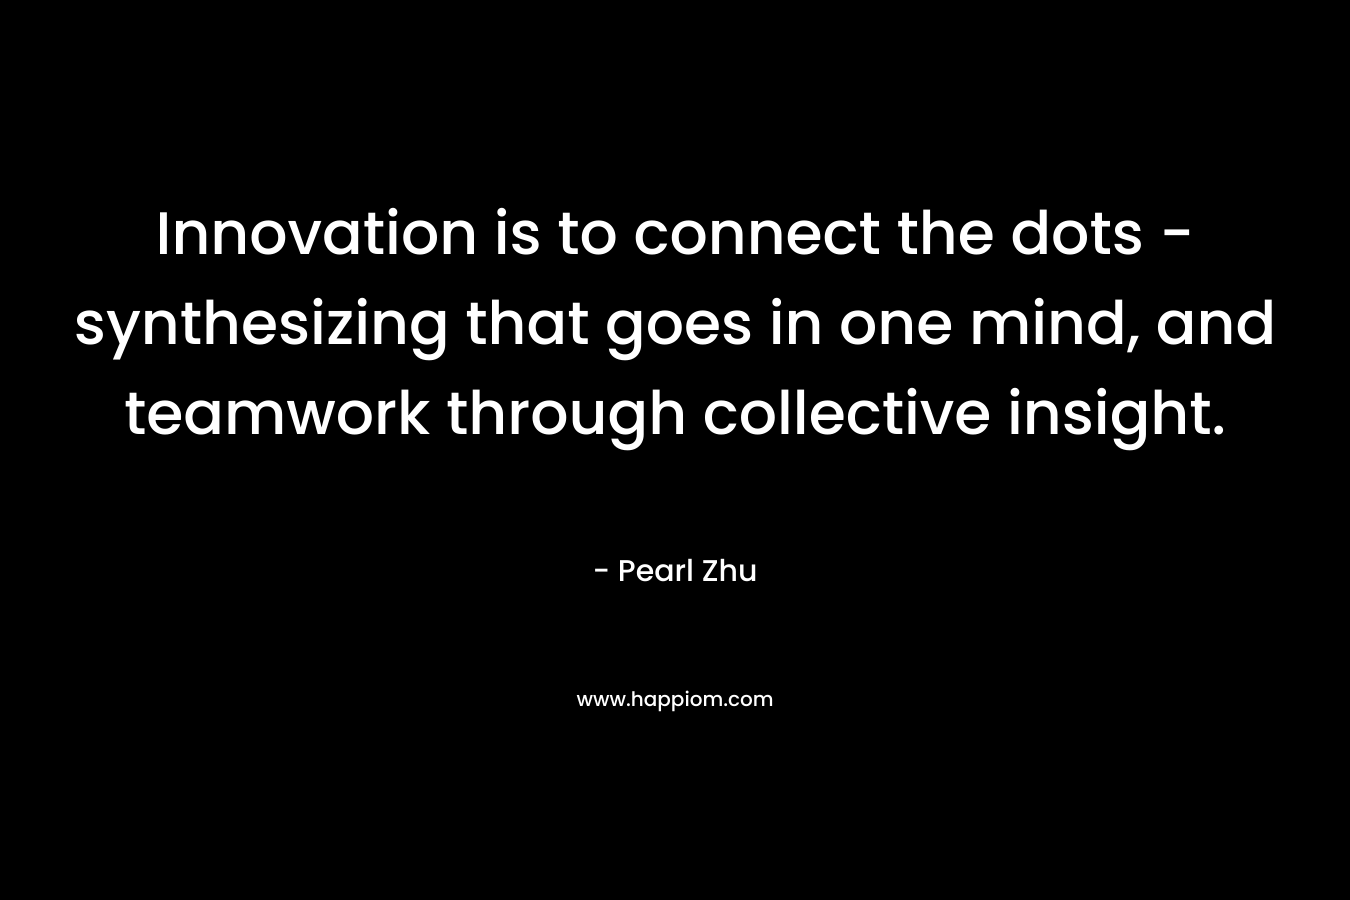 Innovation is to connect the dots - synthesizing that goes in one mind, and teamwork through collective insight.